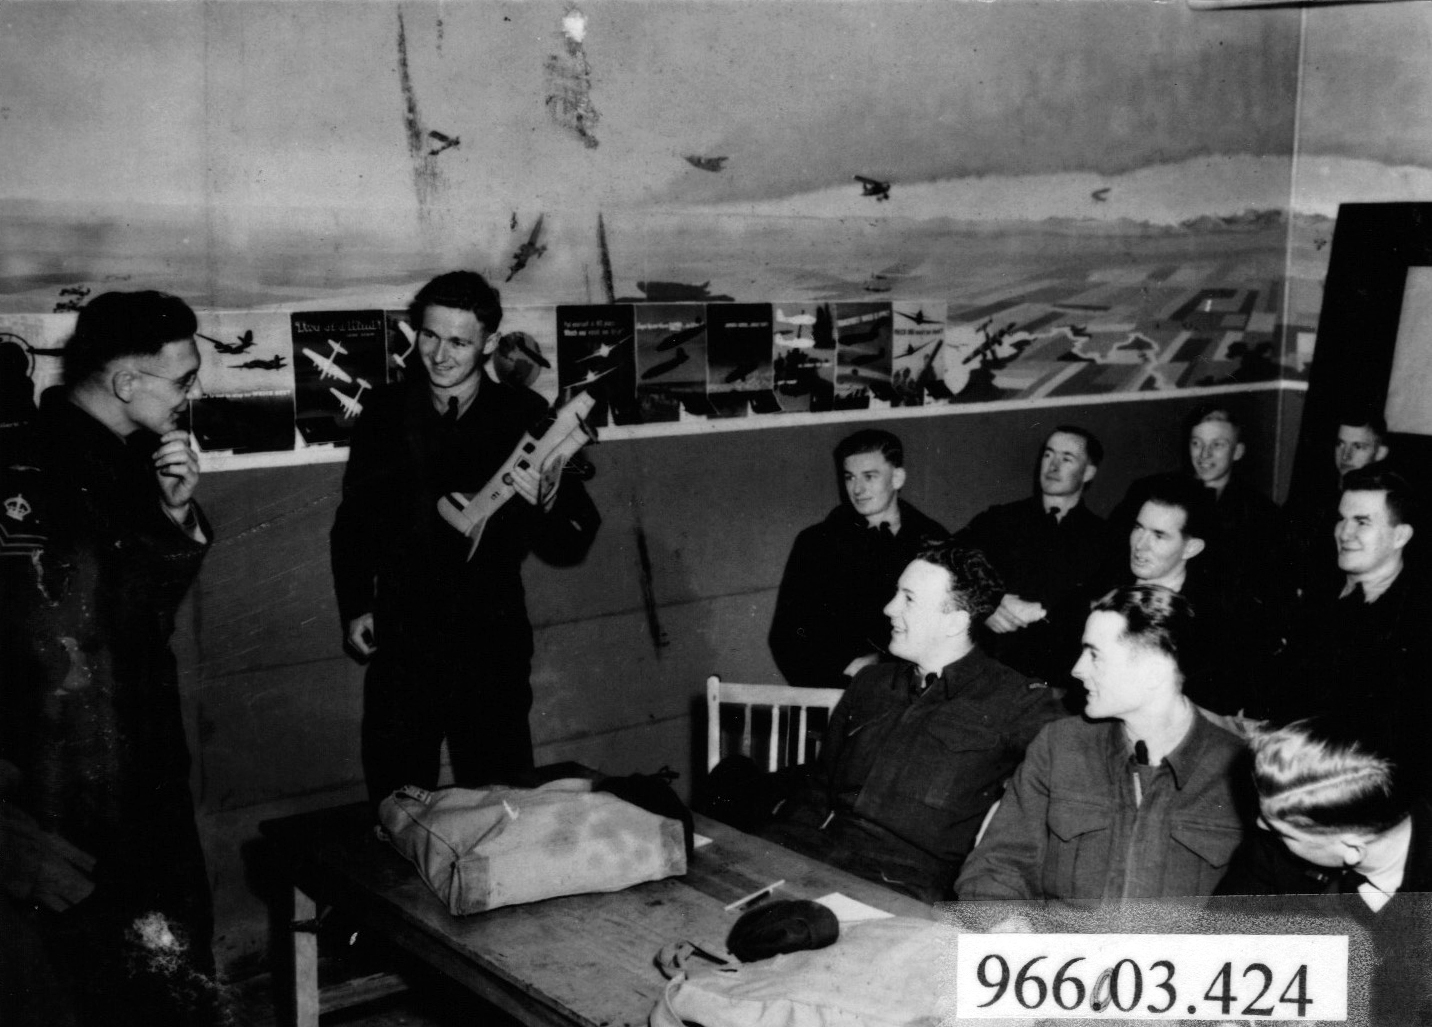 Airman holding model airplane in front of instructor and nine seated students